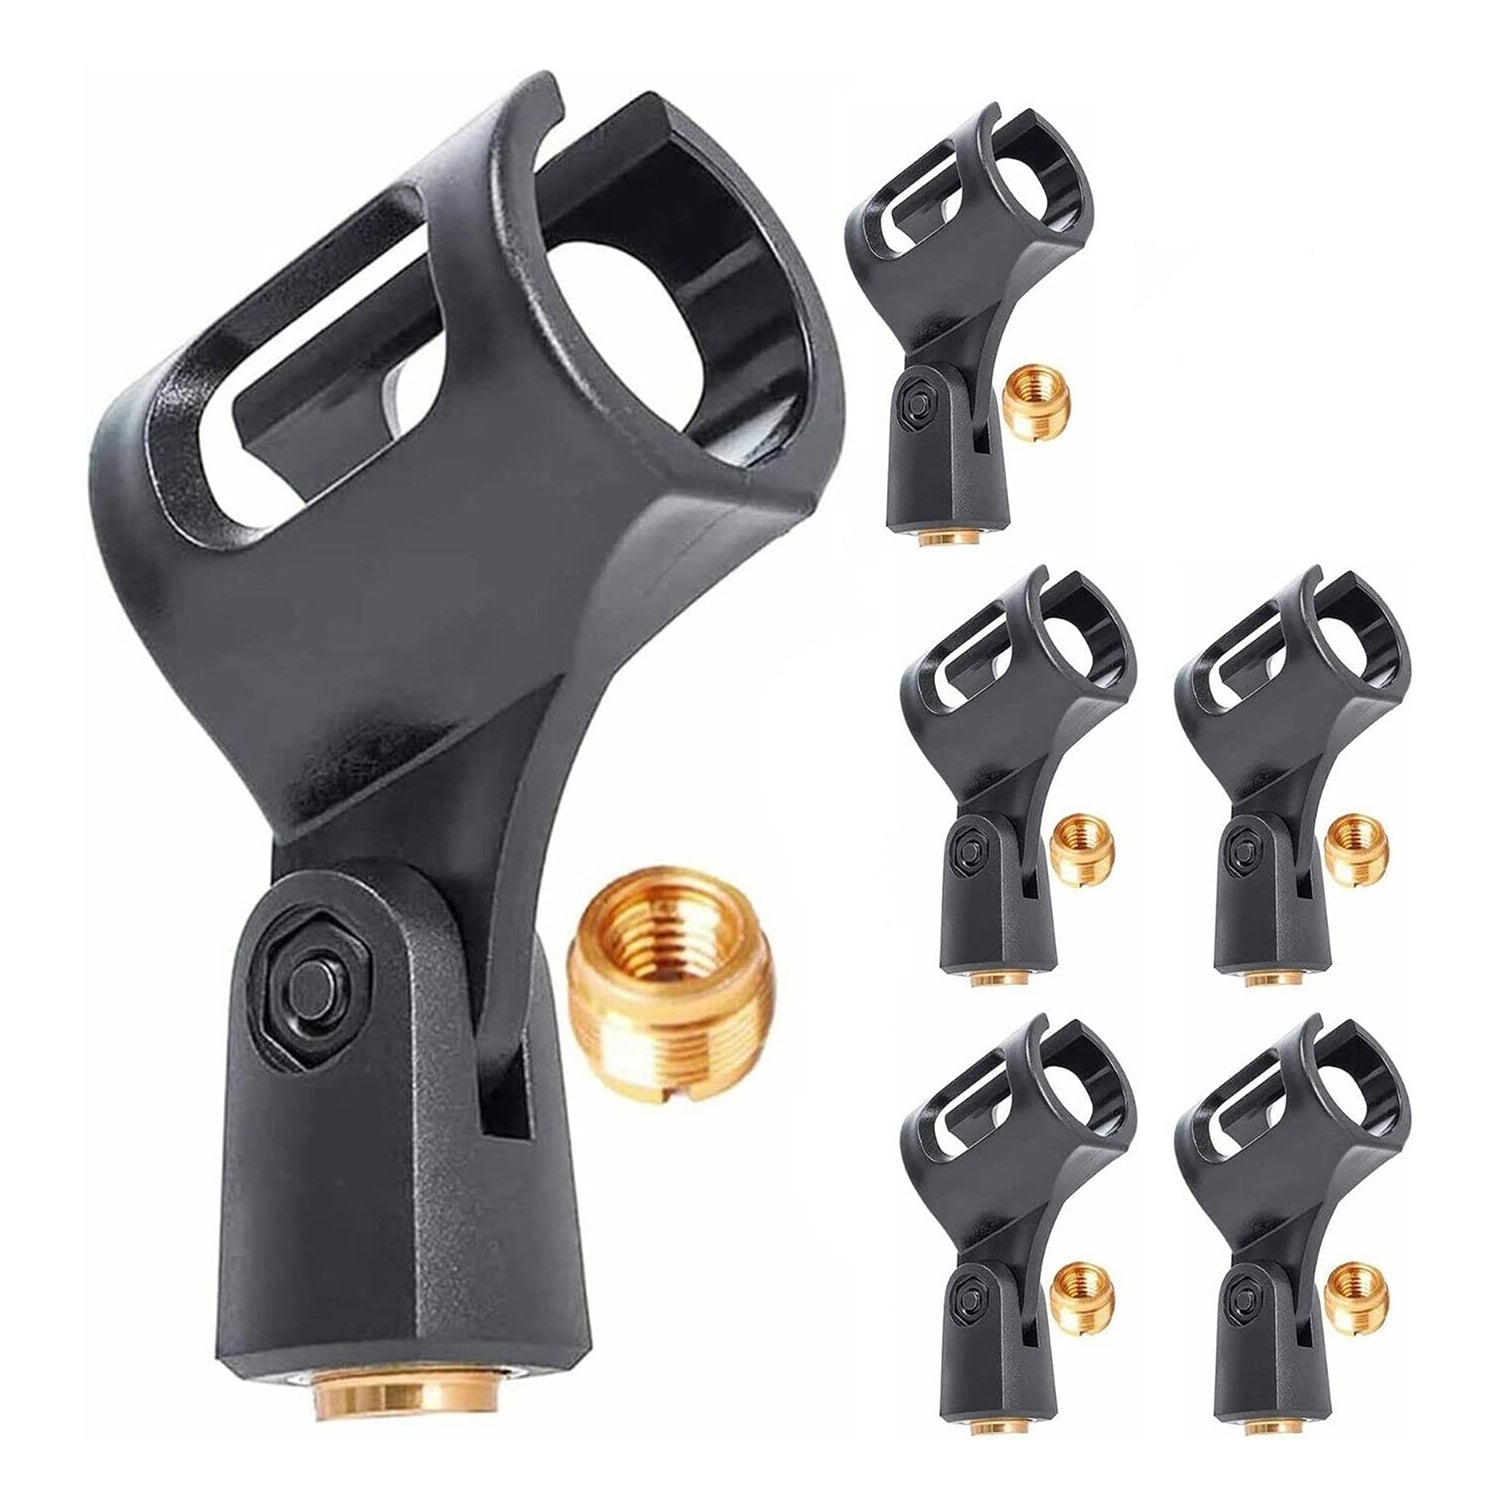 5 Core Microphone Clip Holder 6 Pieces Barrel Style with Screw Adapters 5/8 to 3/8 Inch